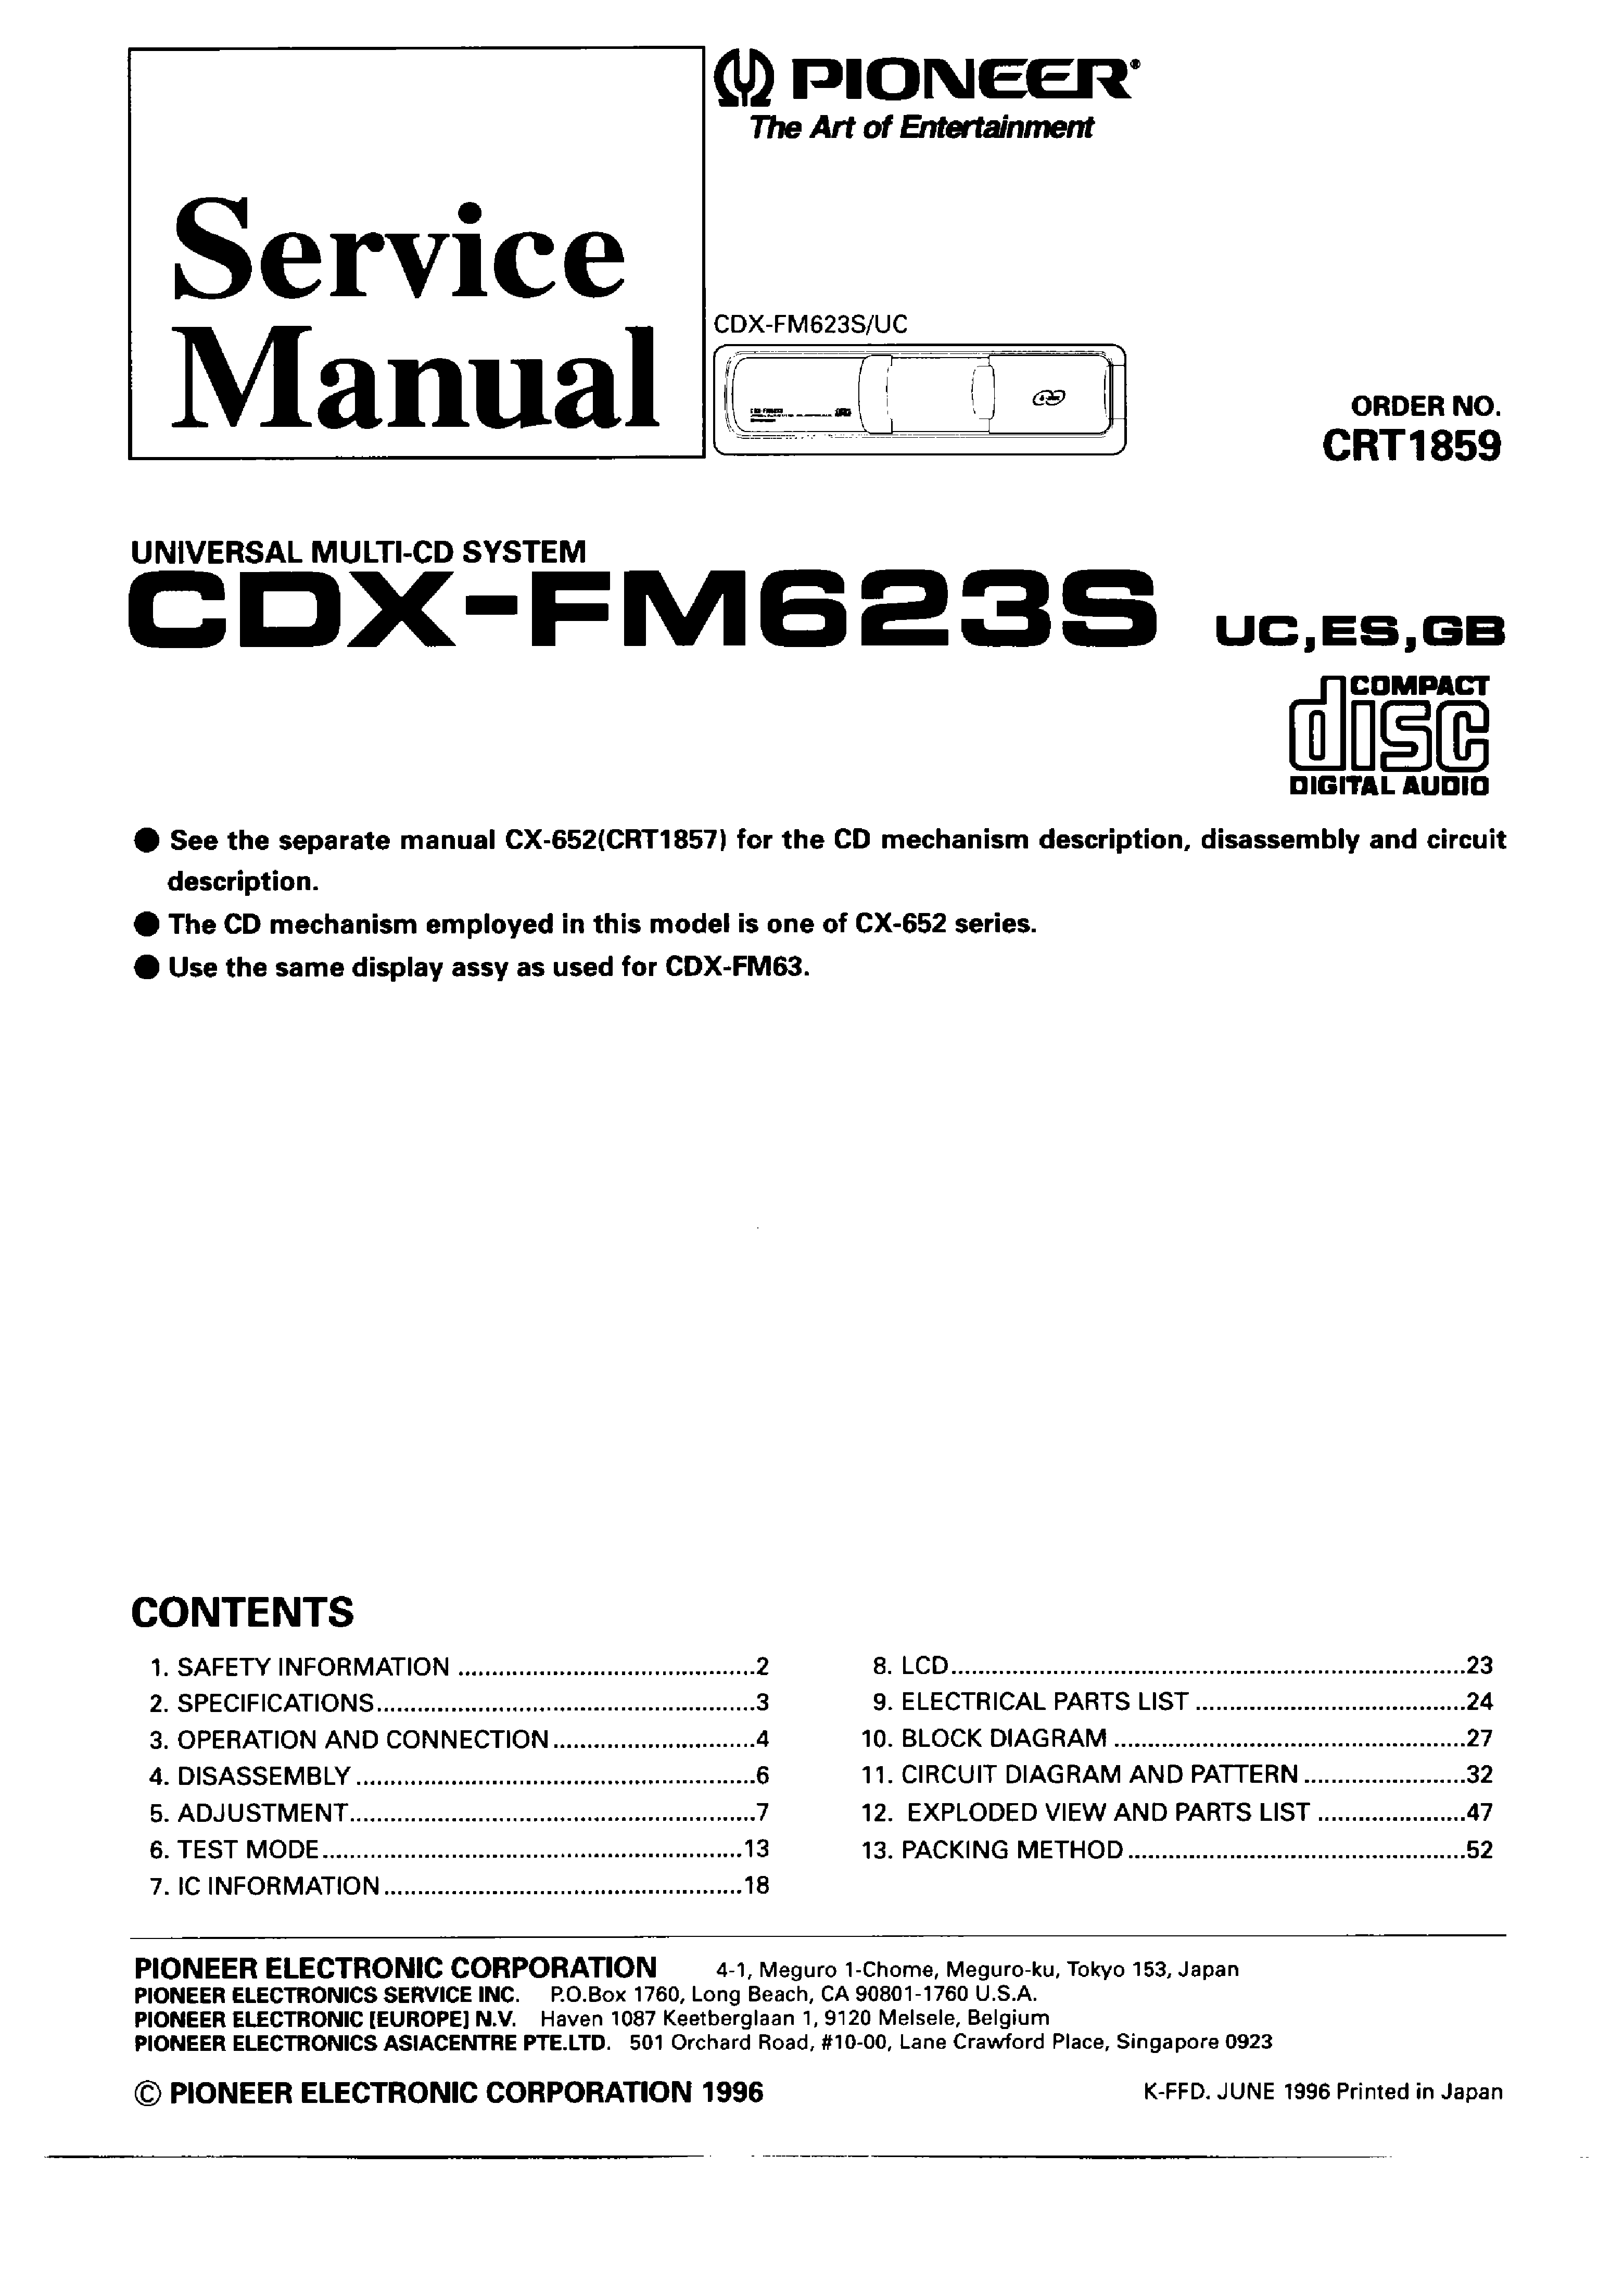 PIONEER CDX-FM-623-S service manual (1st page)